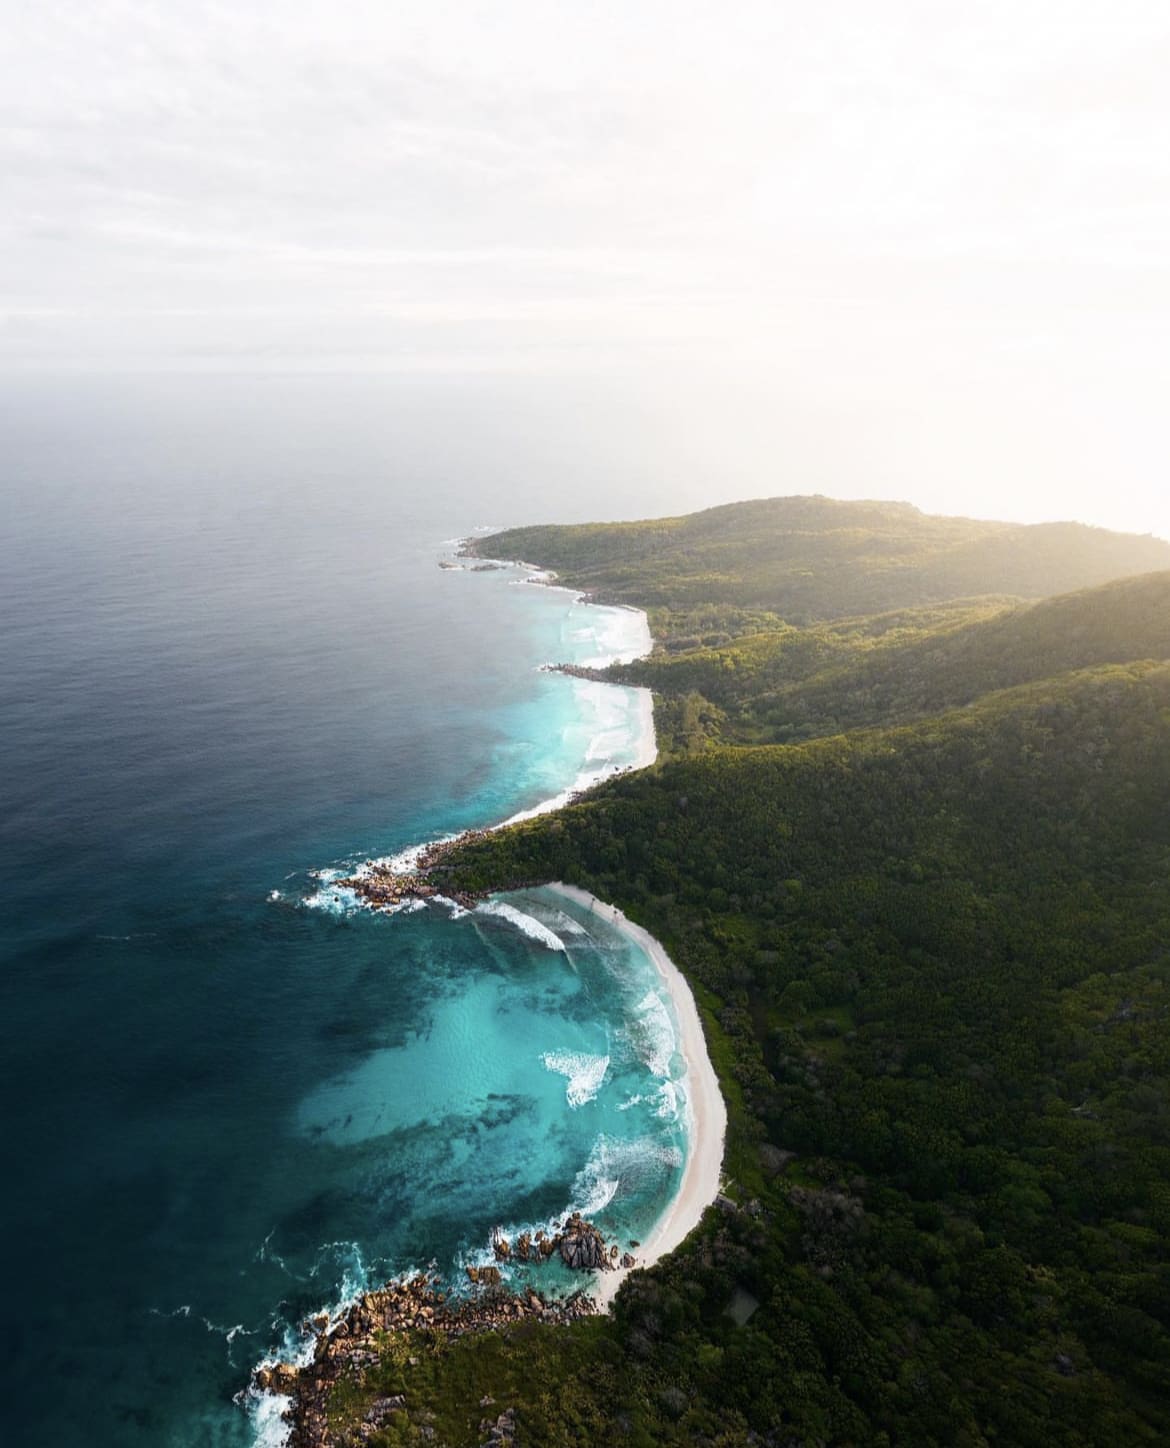 Out of this world Island landscape in the Seychelles